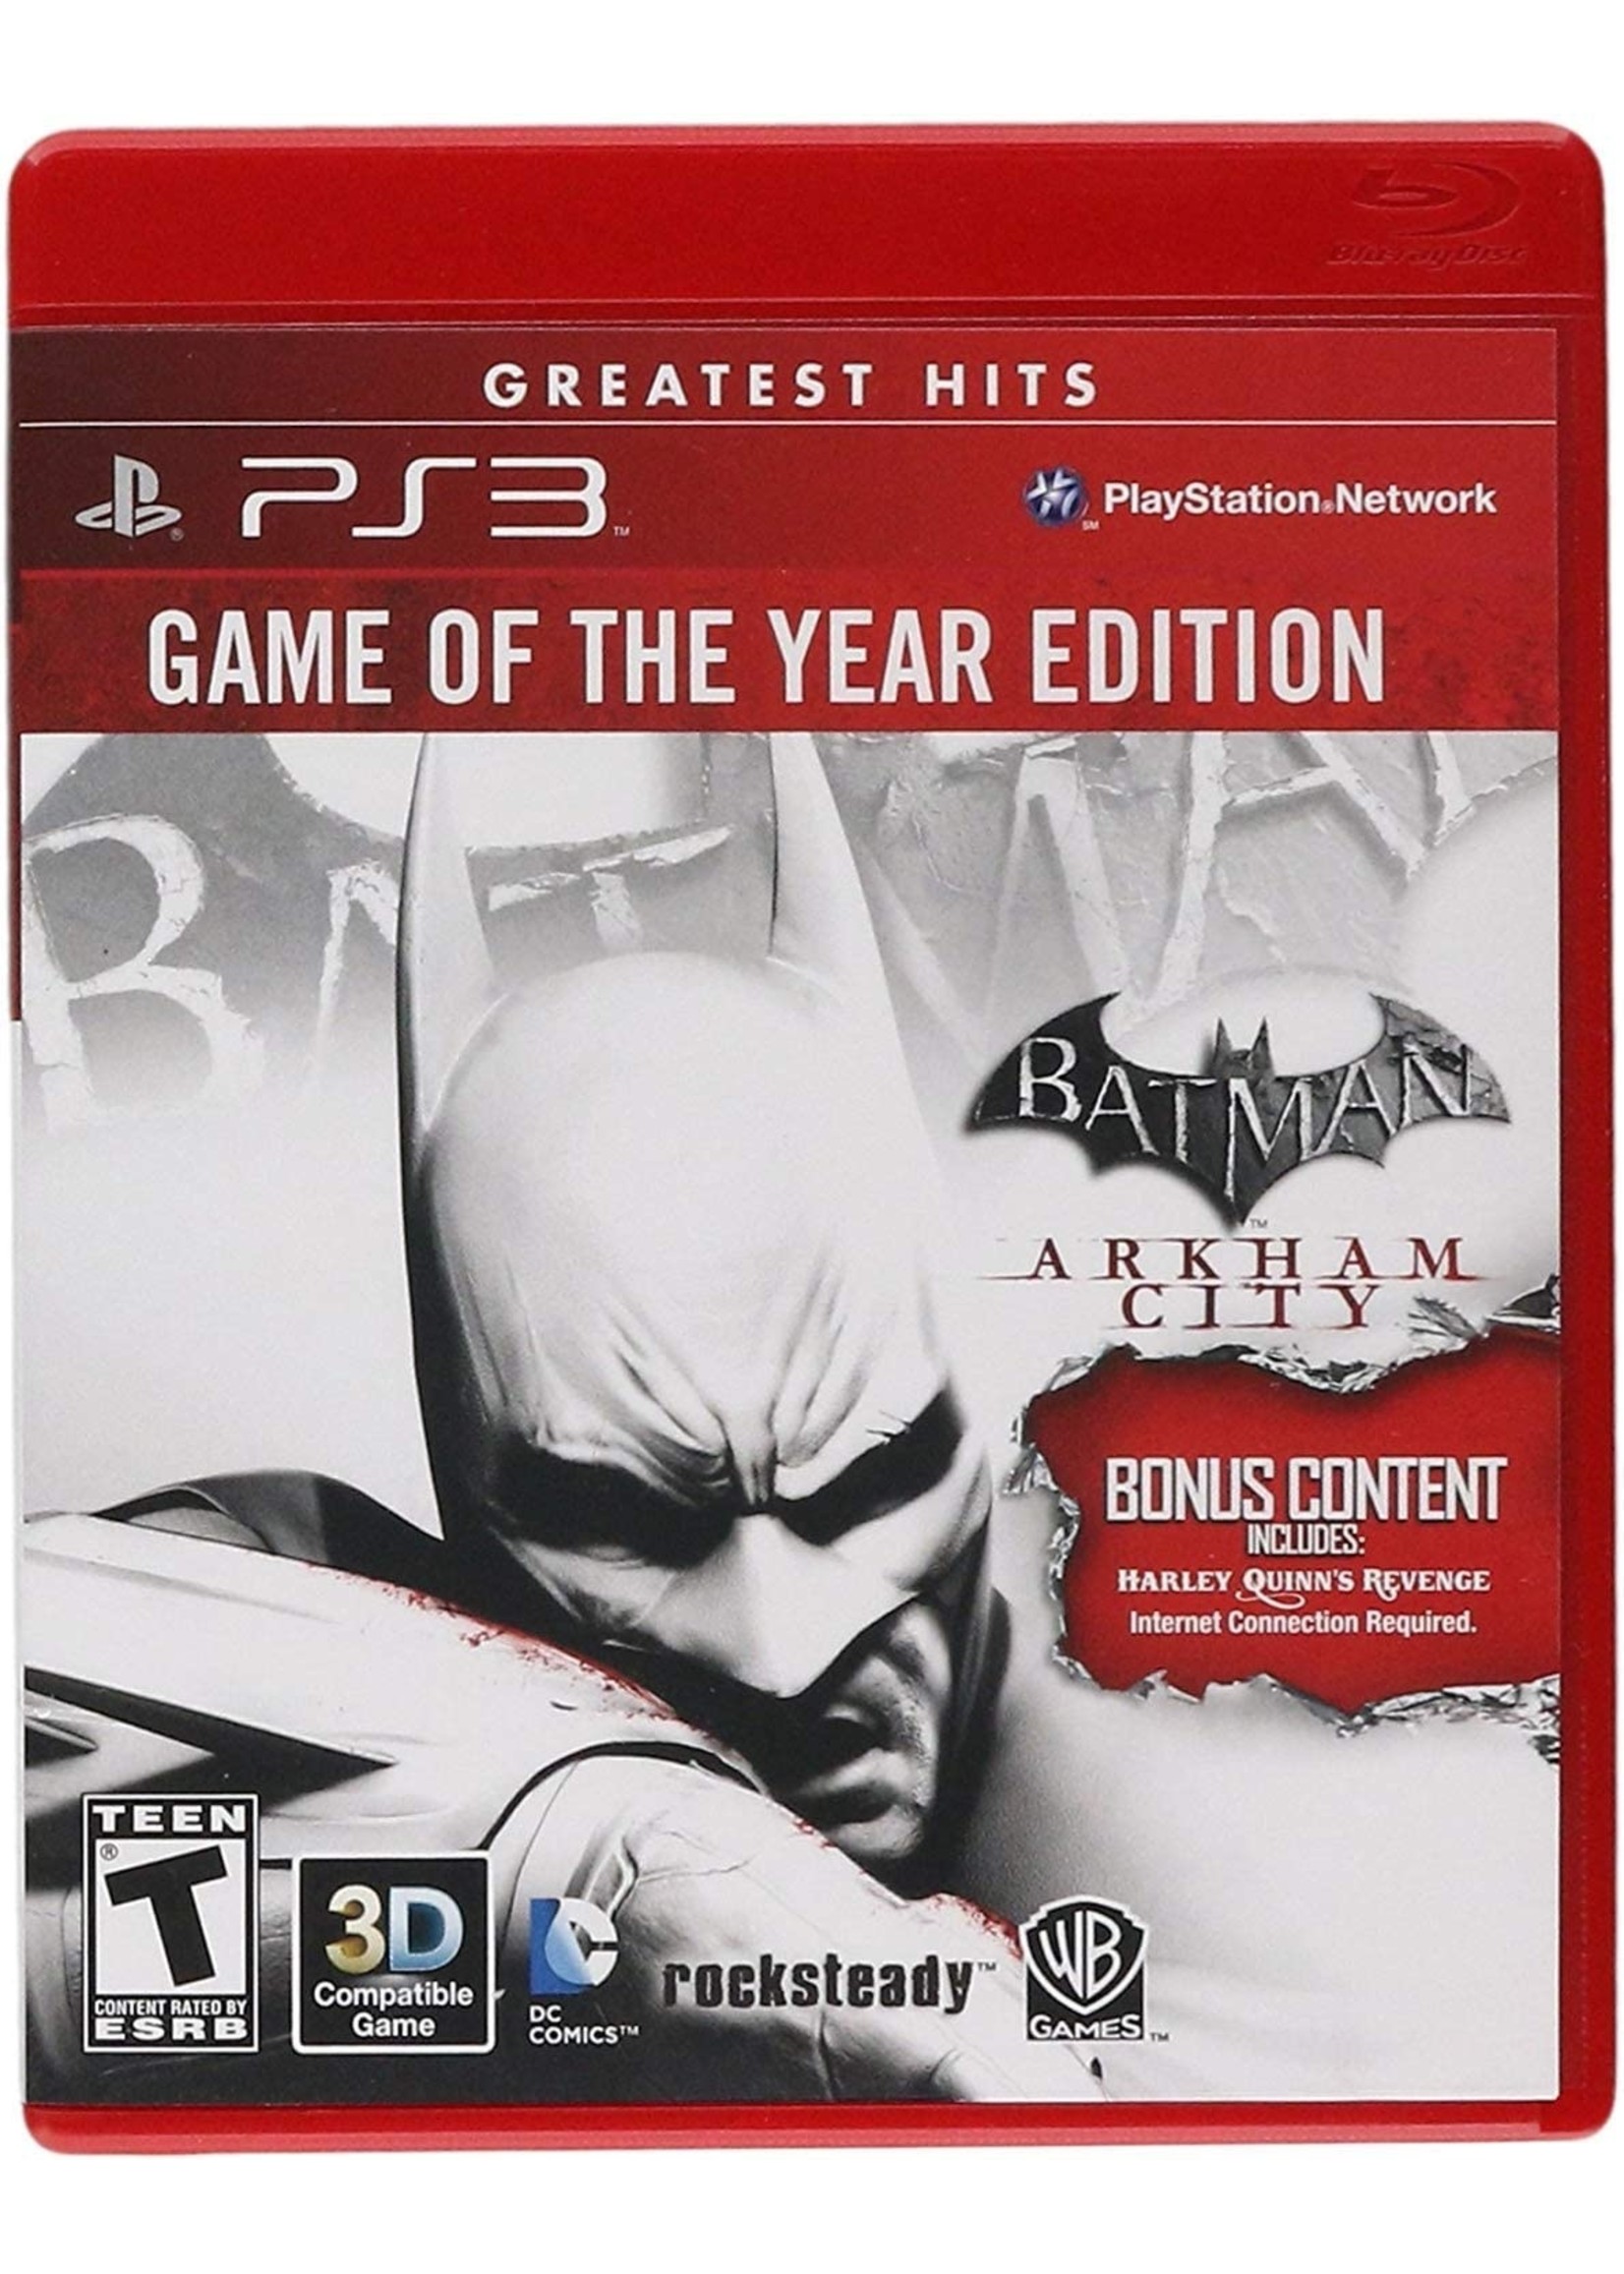 Sony Playstation 3 (PS3) Batman: Arkham City Game Of The Year